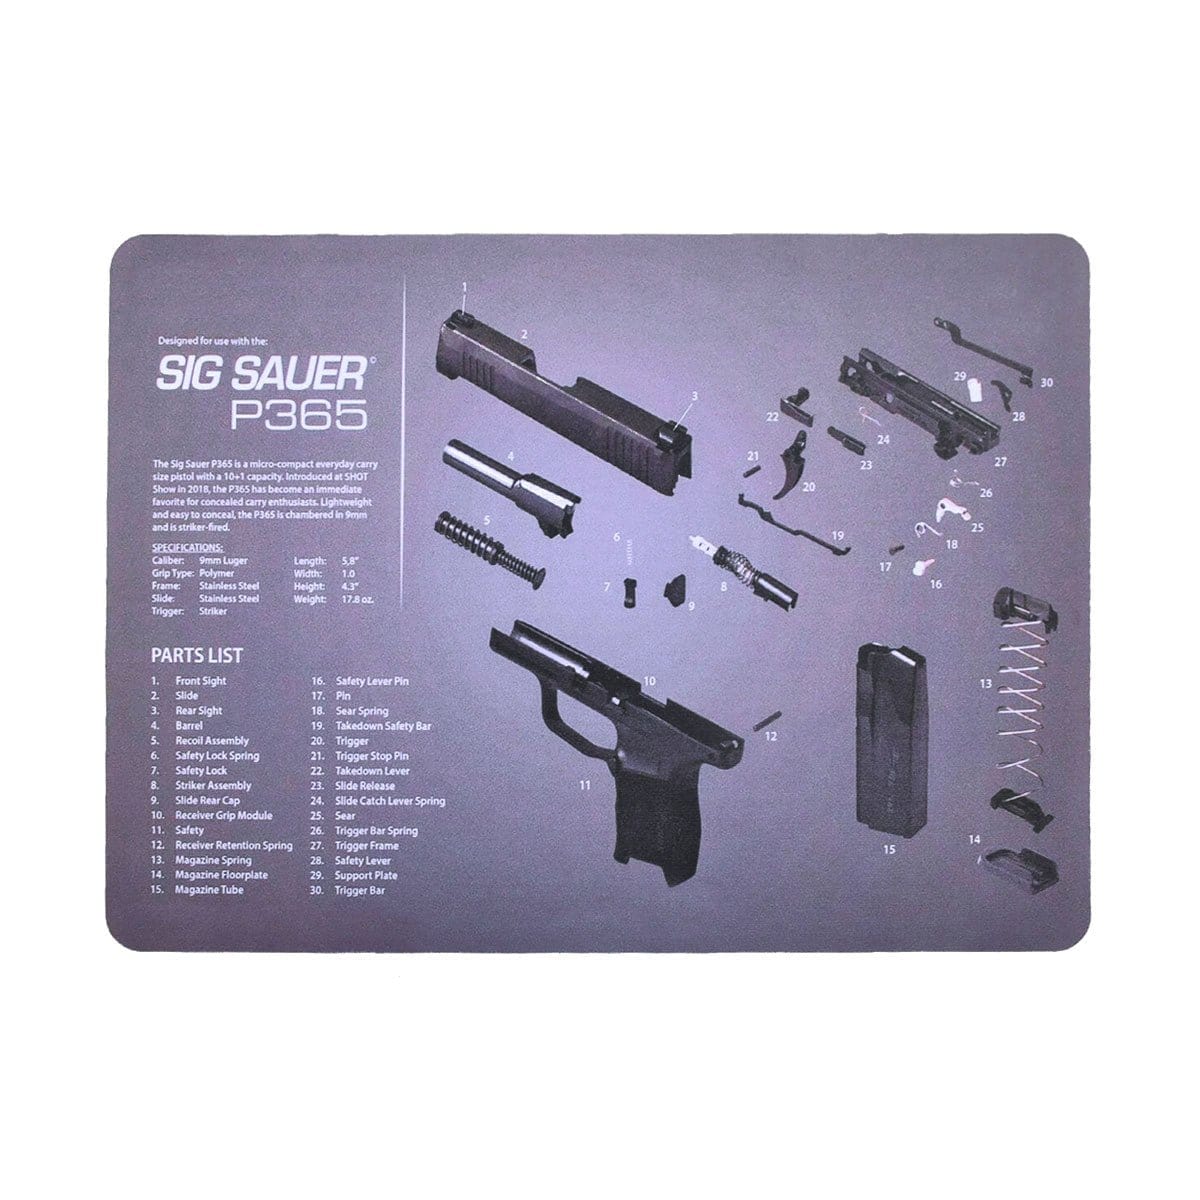 ACTION AIRSOFT 0 Sia sauer P365 Tapis nettoyage P365 1911 Glock